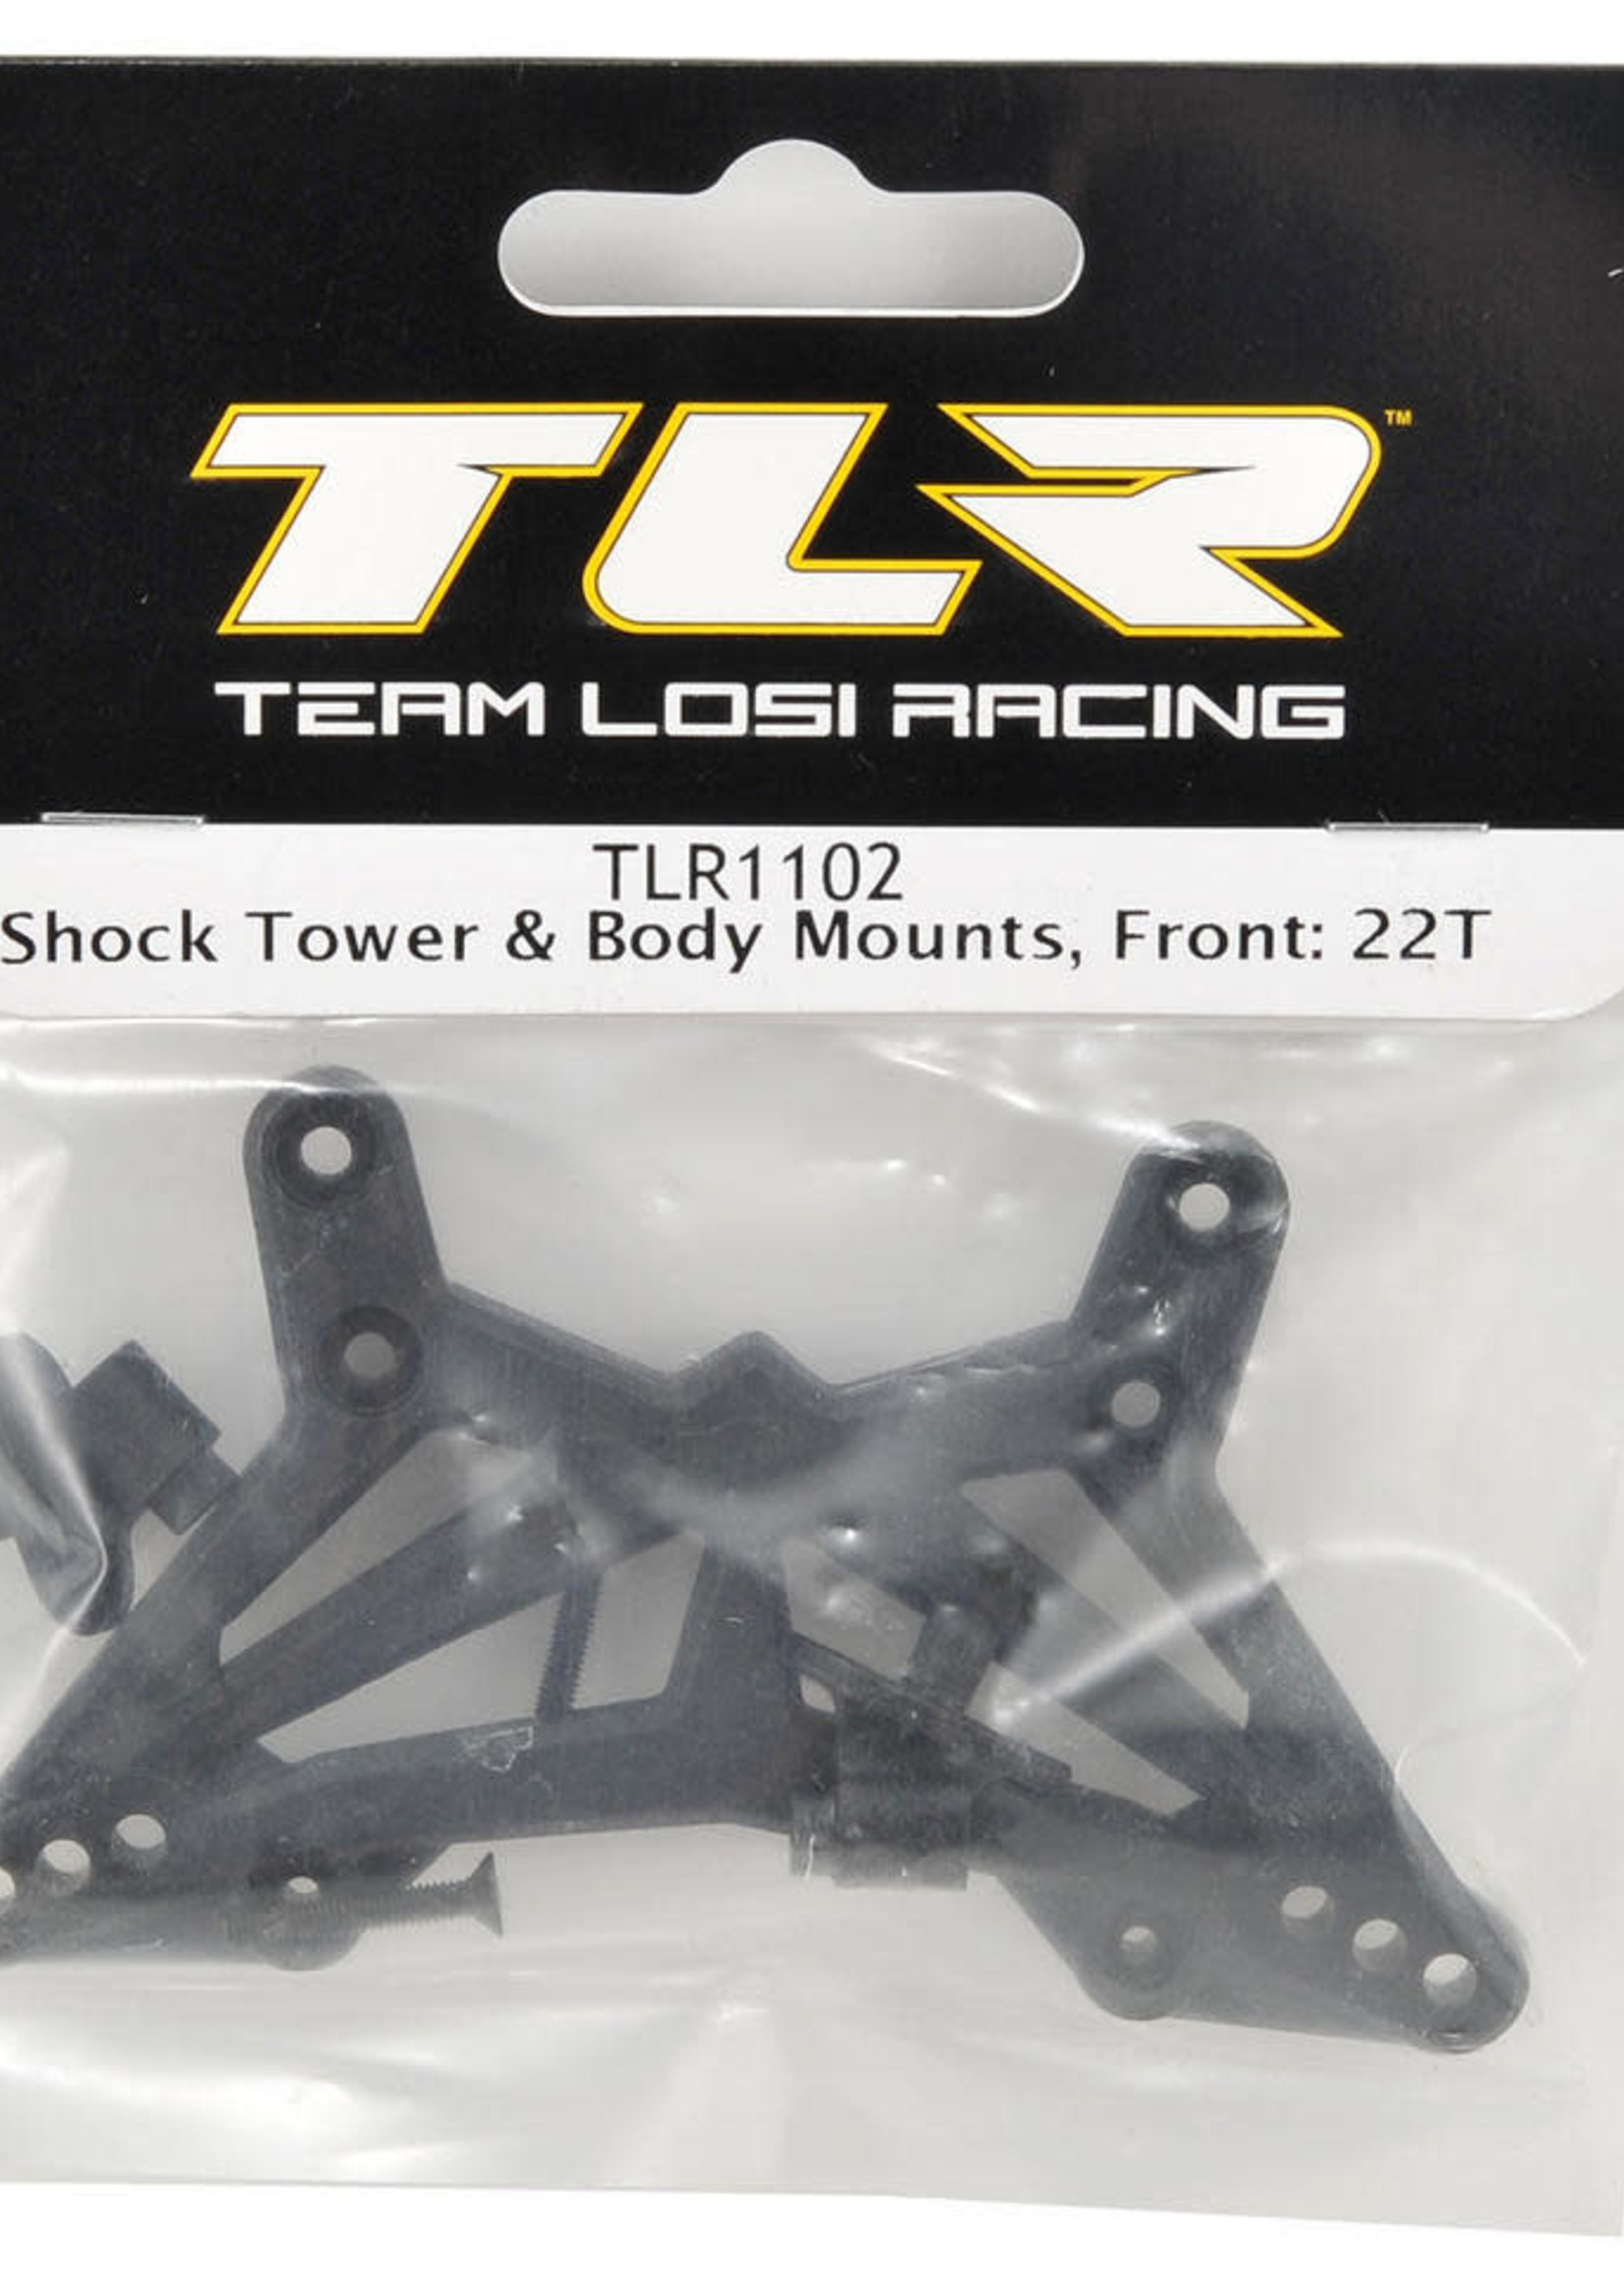 TLR Shock Tower & Body Mounts, Front: 22T